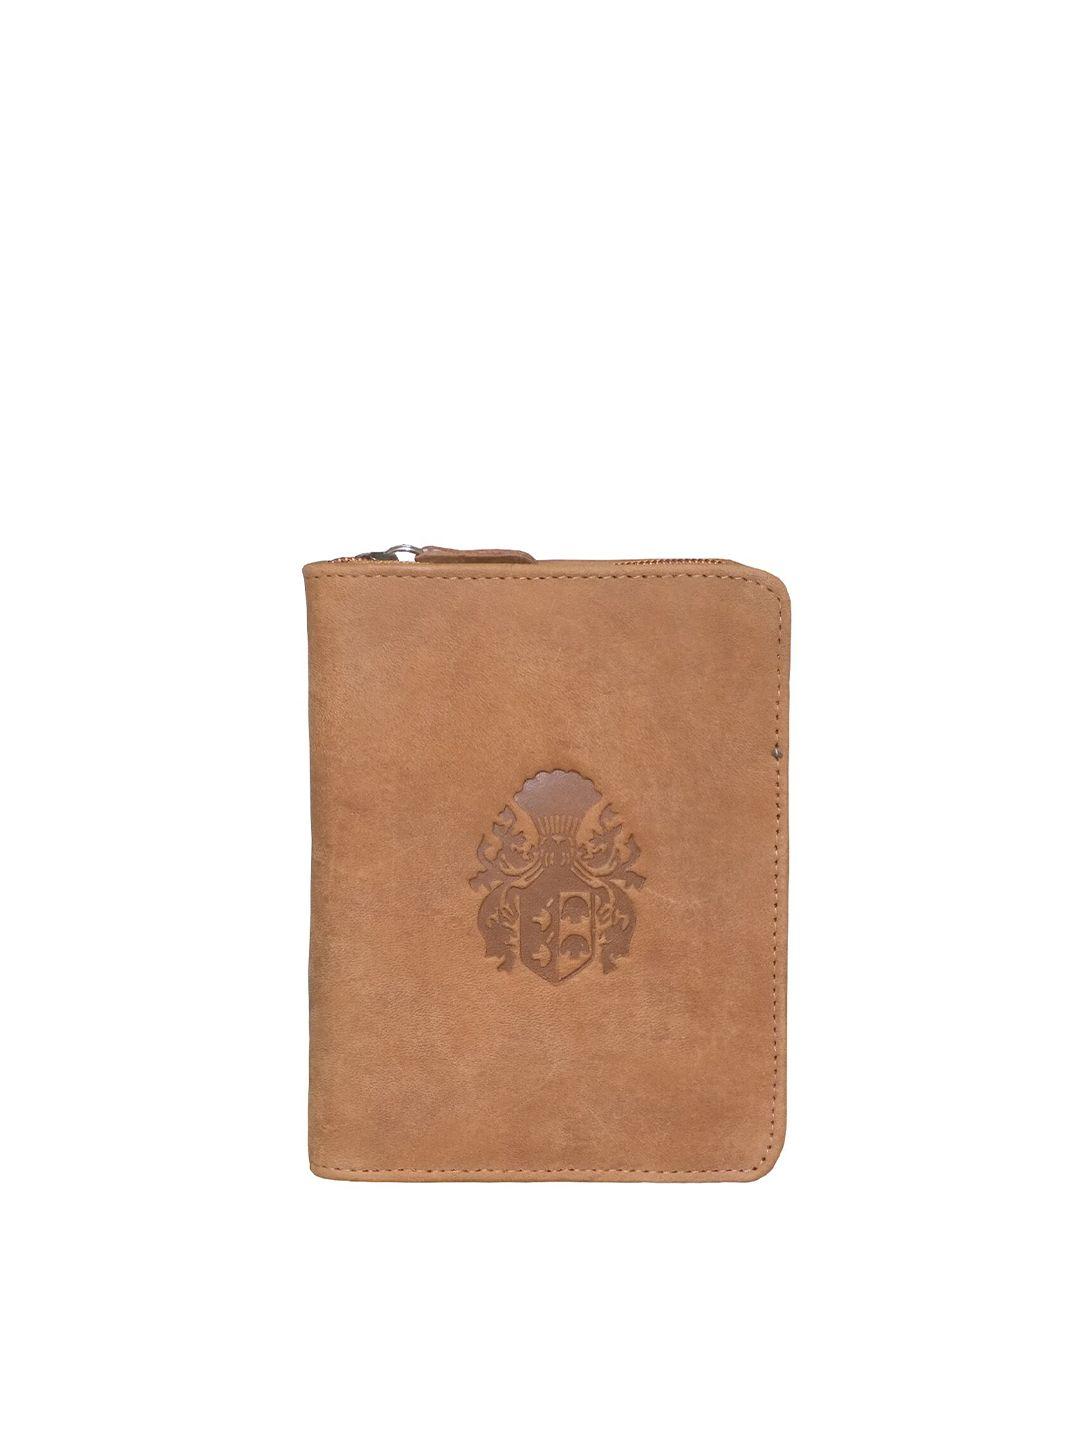 style shoes unisex tan leather passport holder